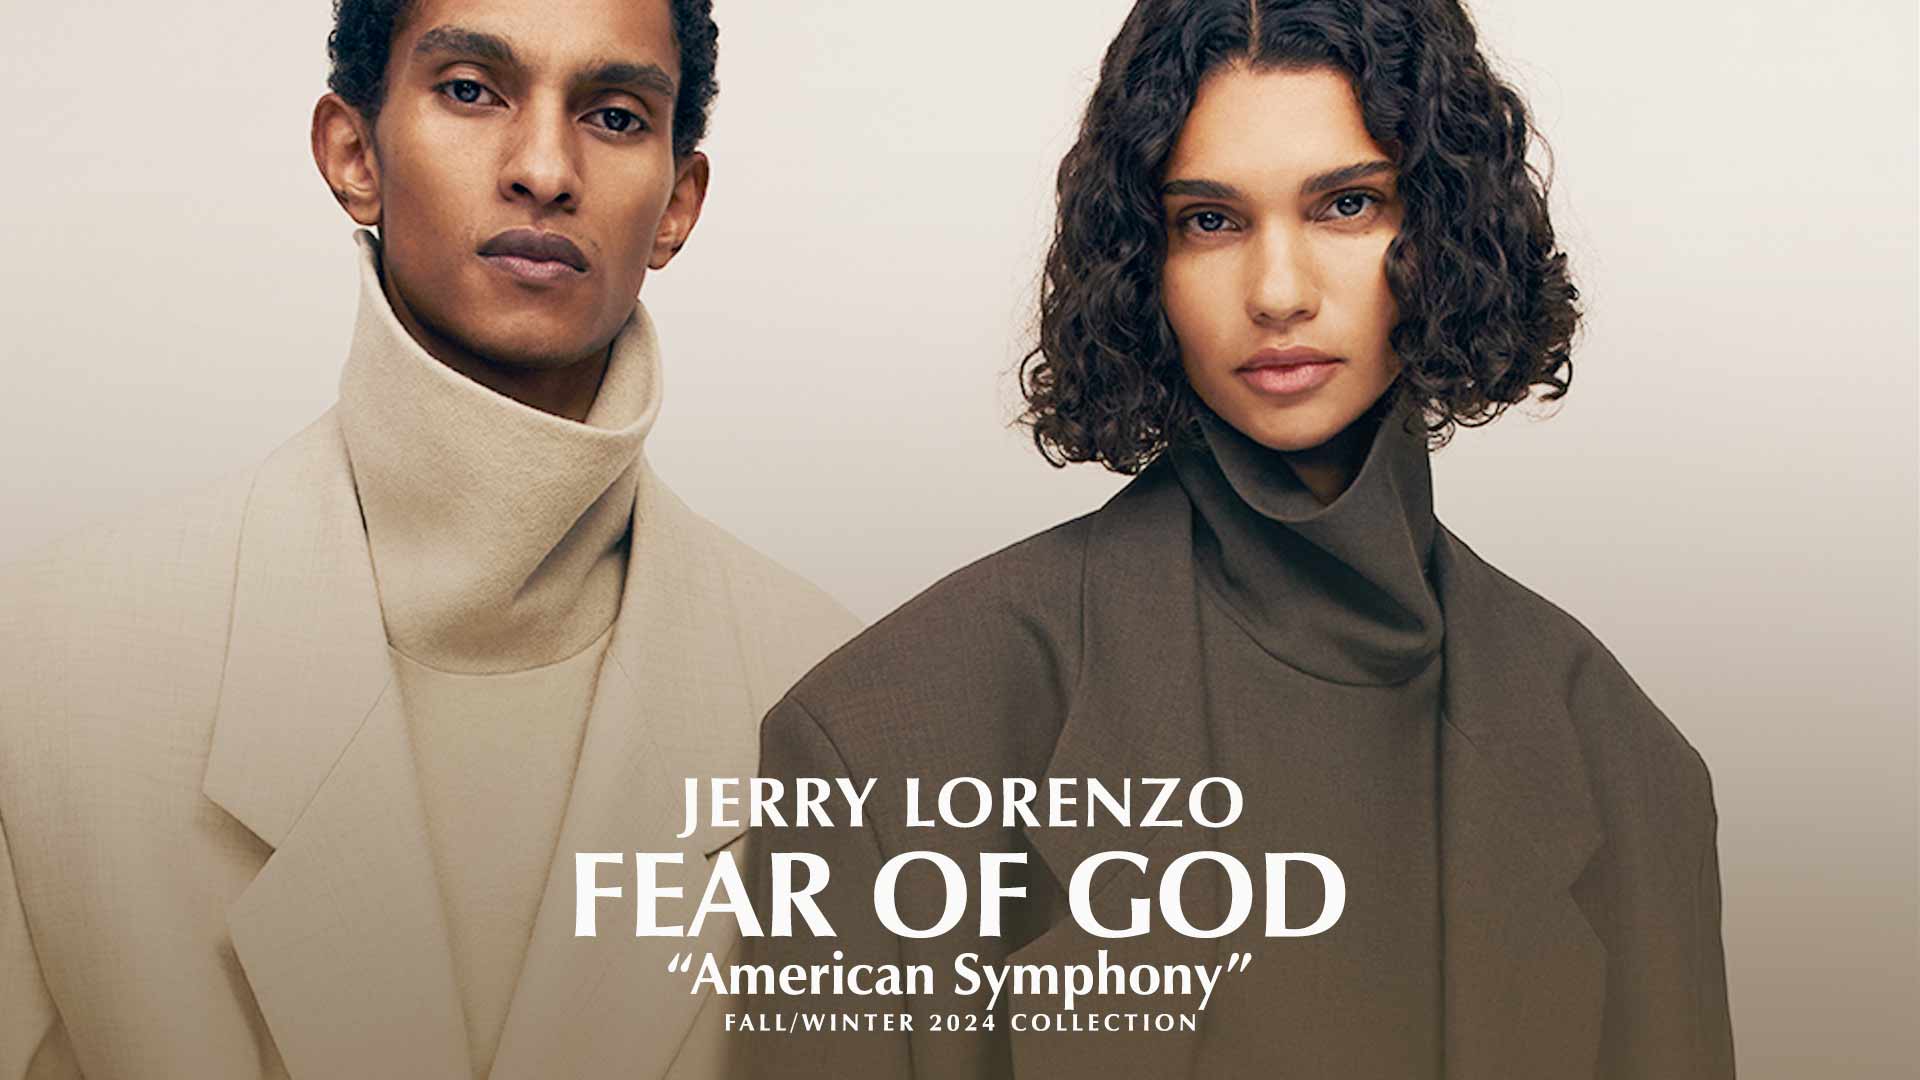 'AMERICAN SYMPHONY' FALL/WINTER 2024 COLLECTION